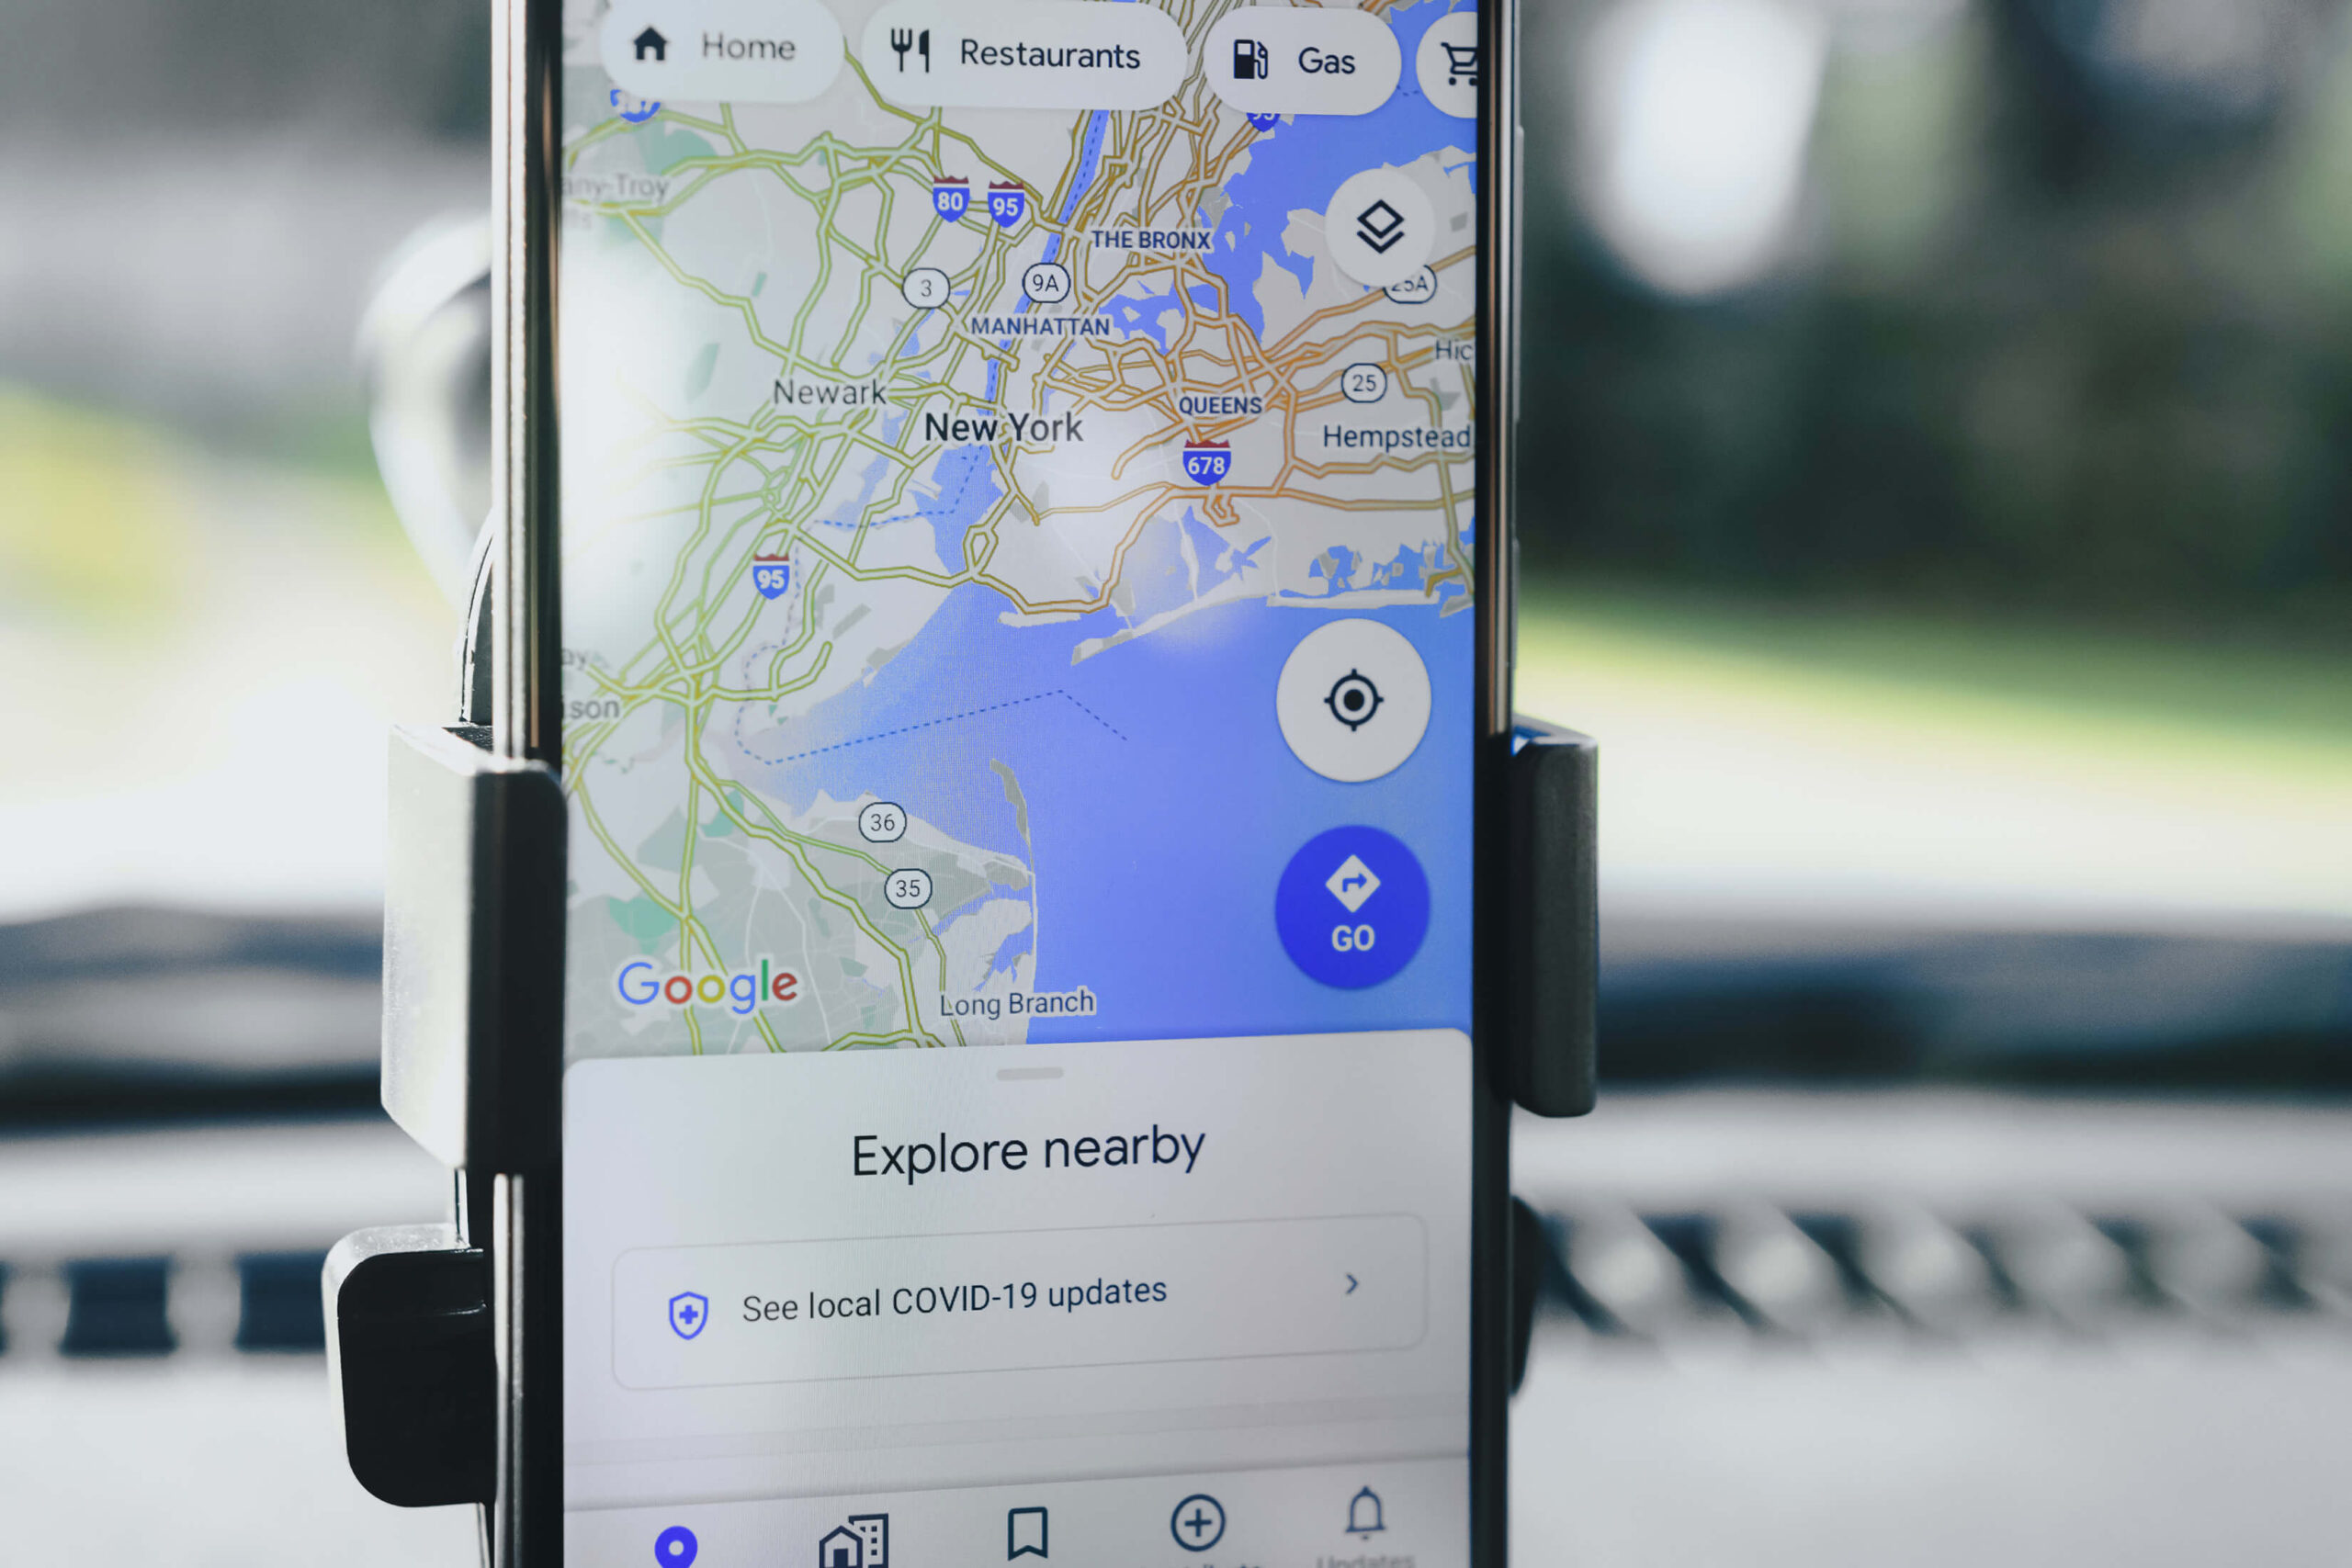 Google maps truck routes directions on phone